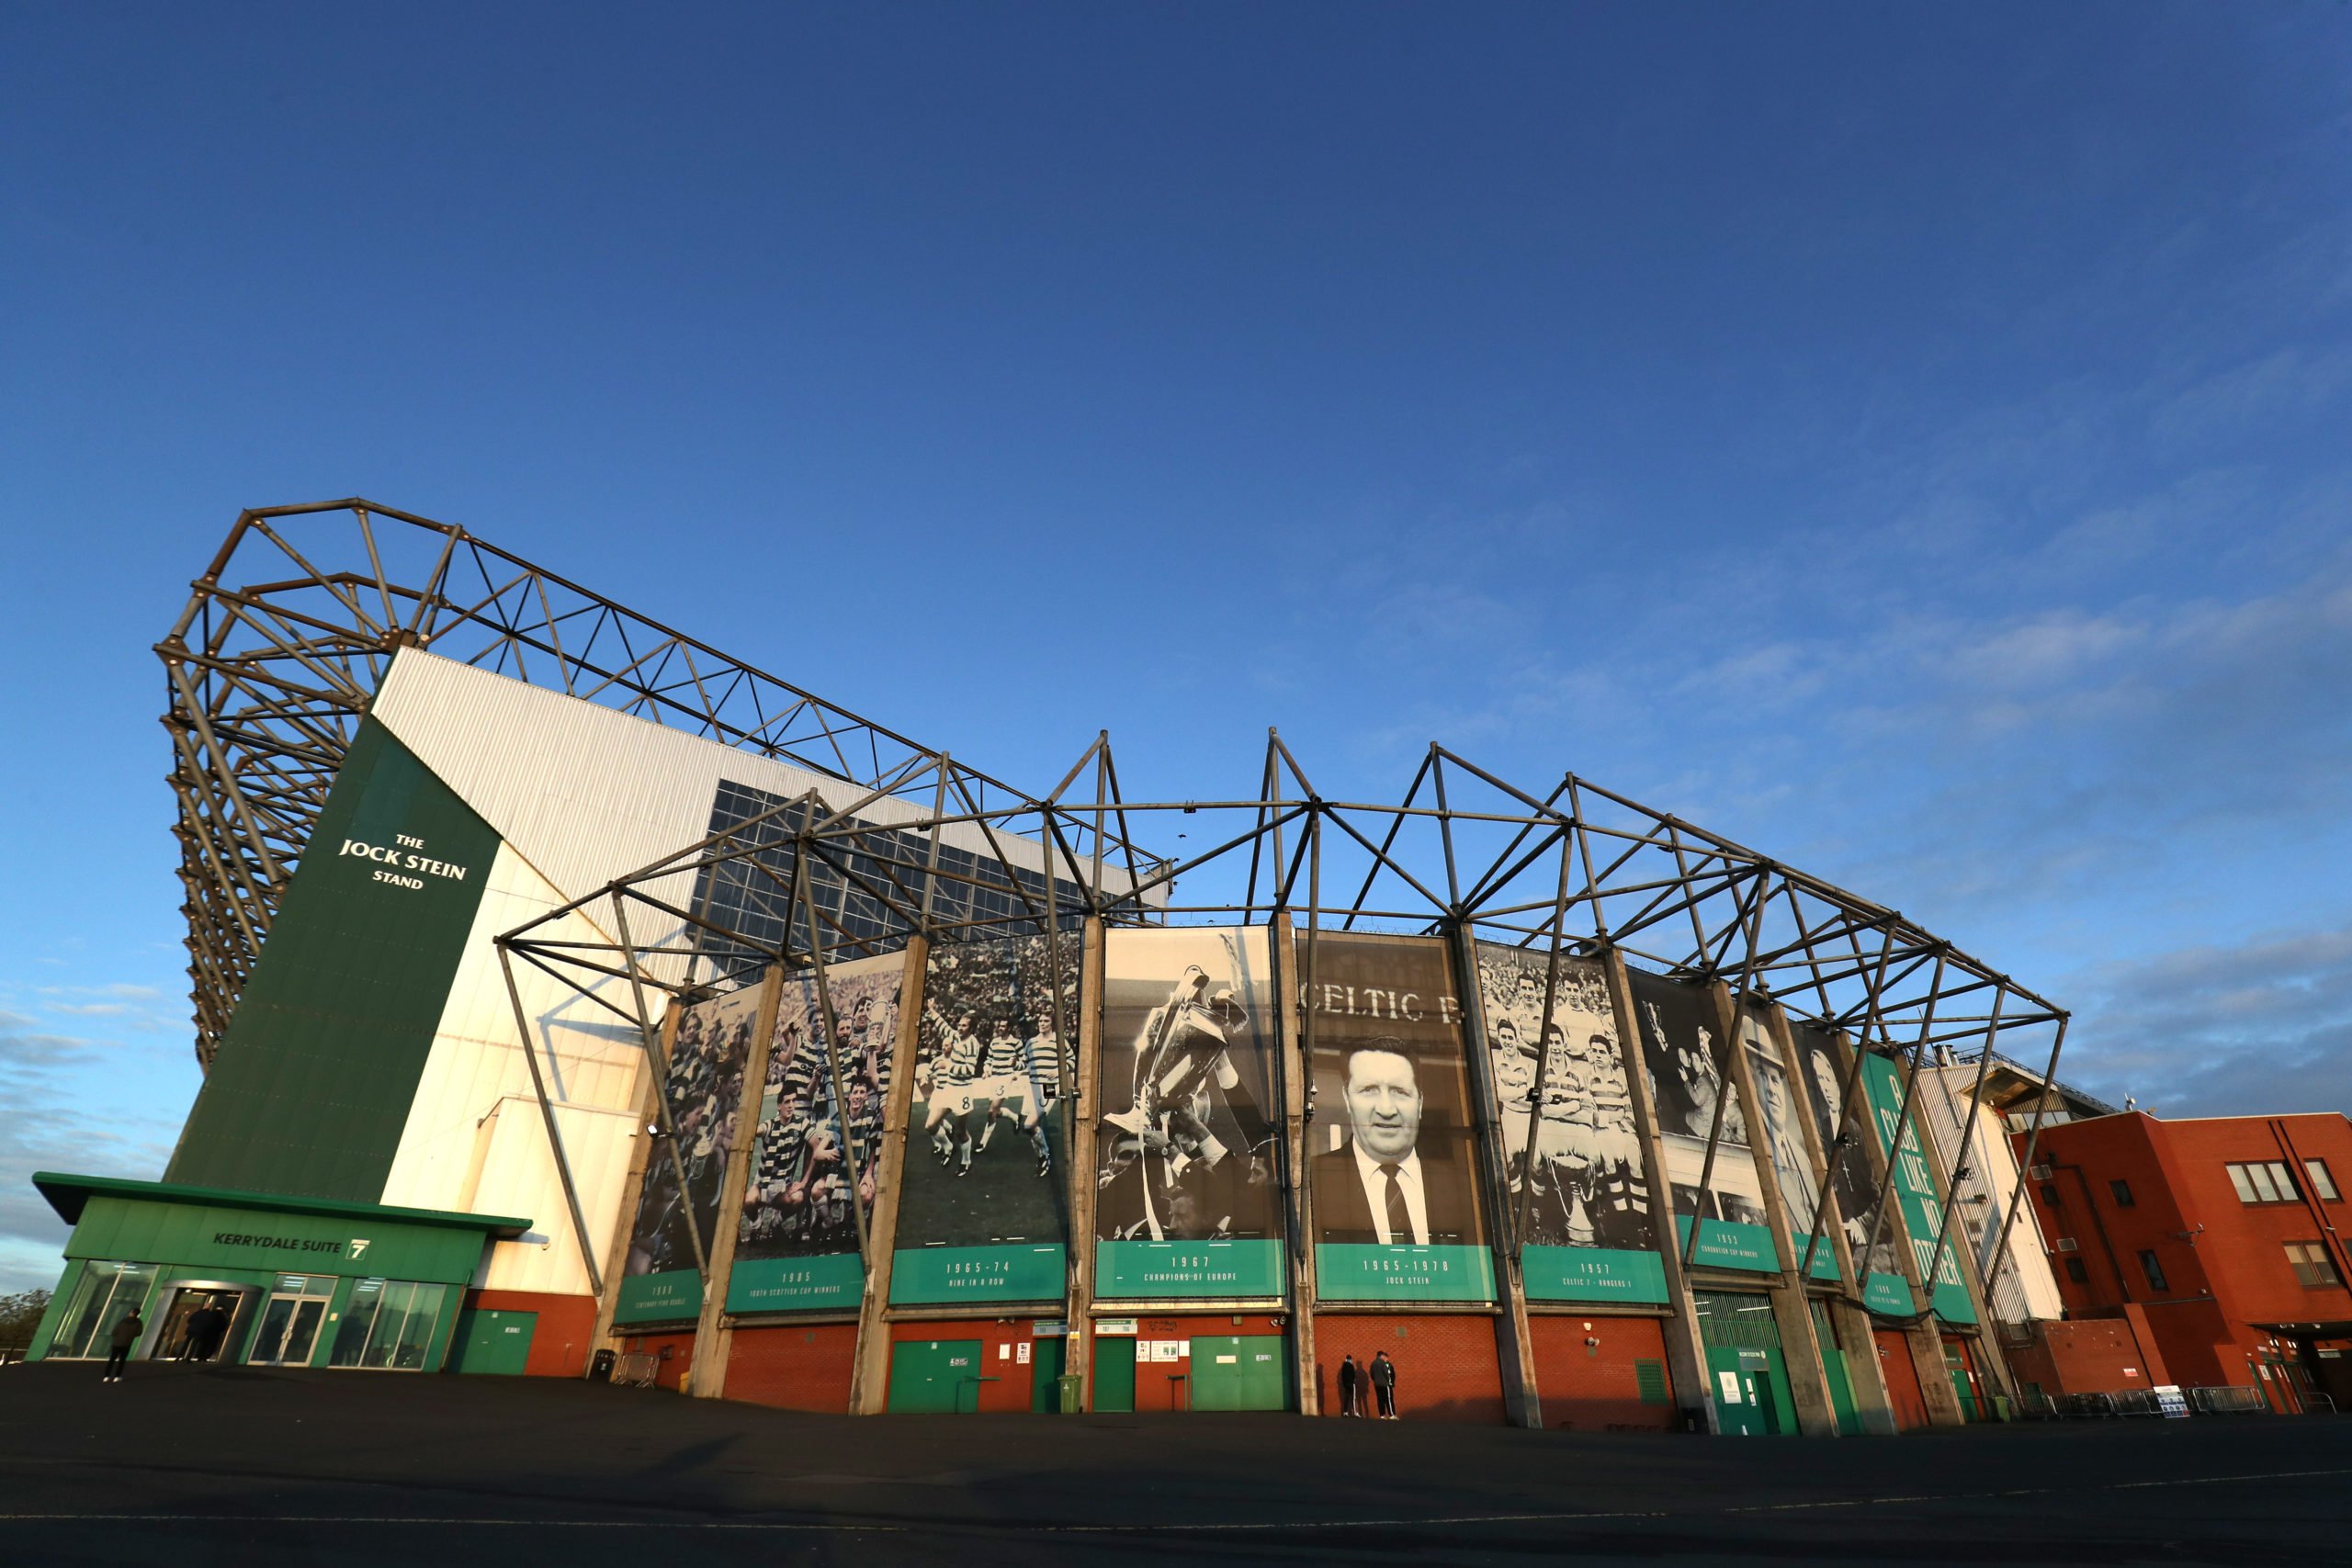 Celtic share price dips amidst managerial uncertainty